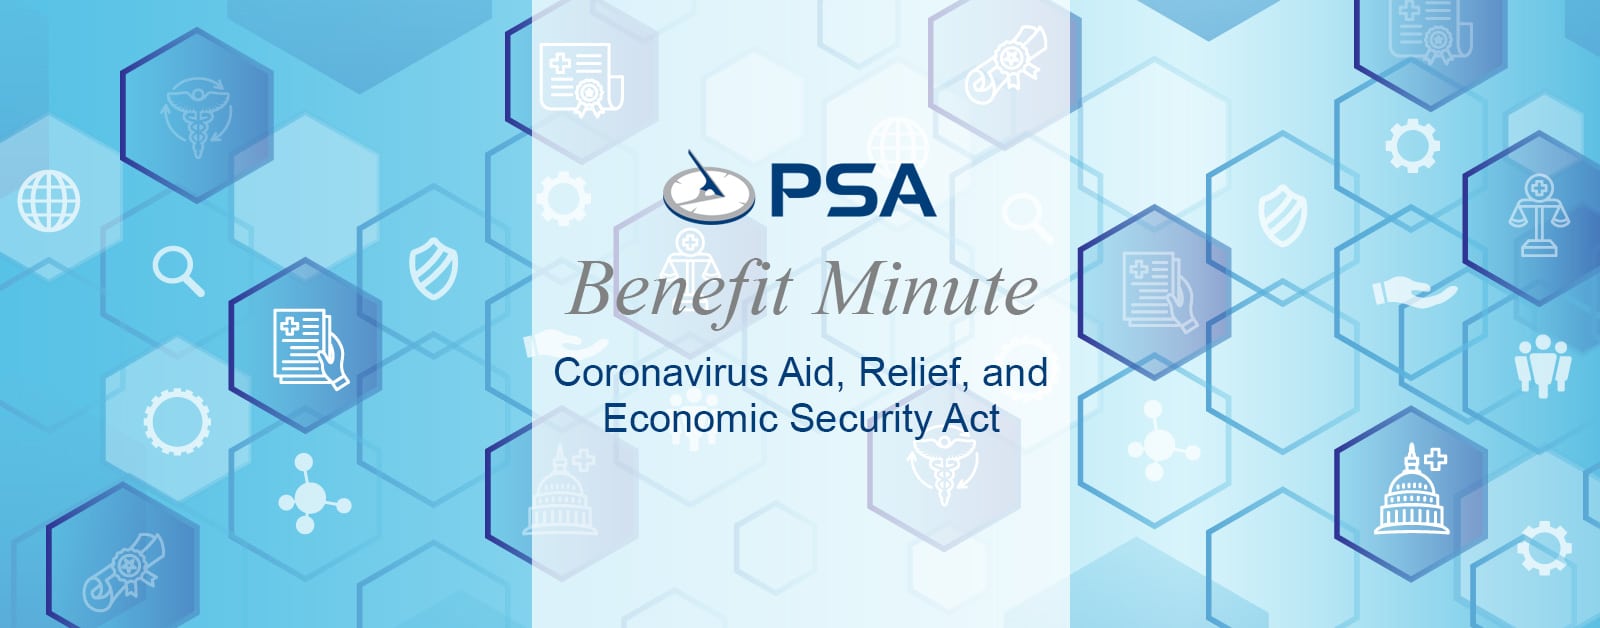 Benefit Minute graphic on PSA Financial's website